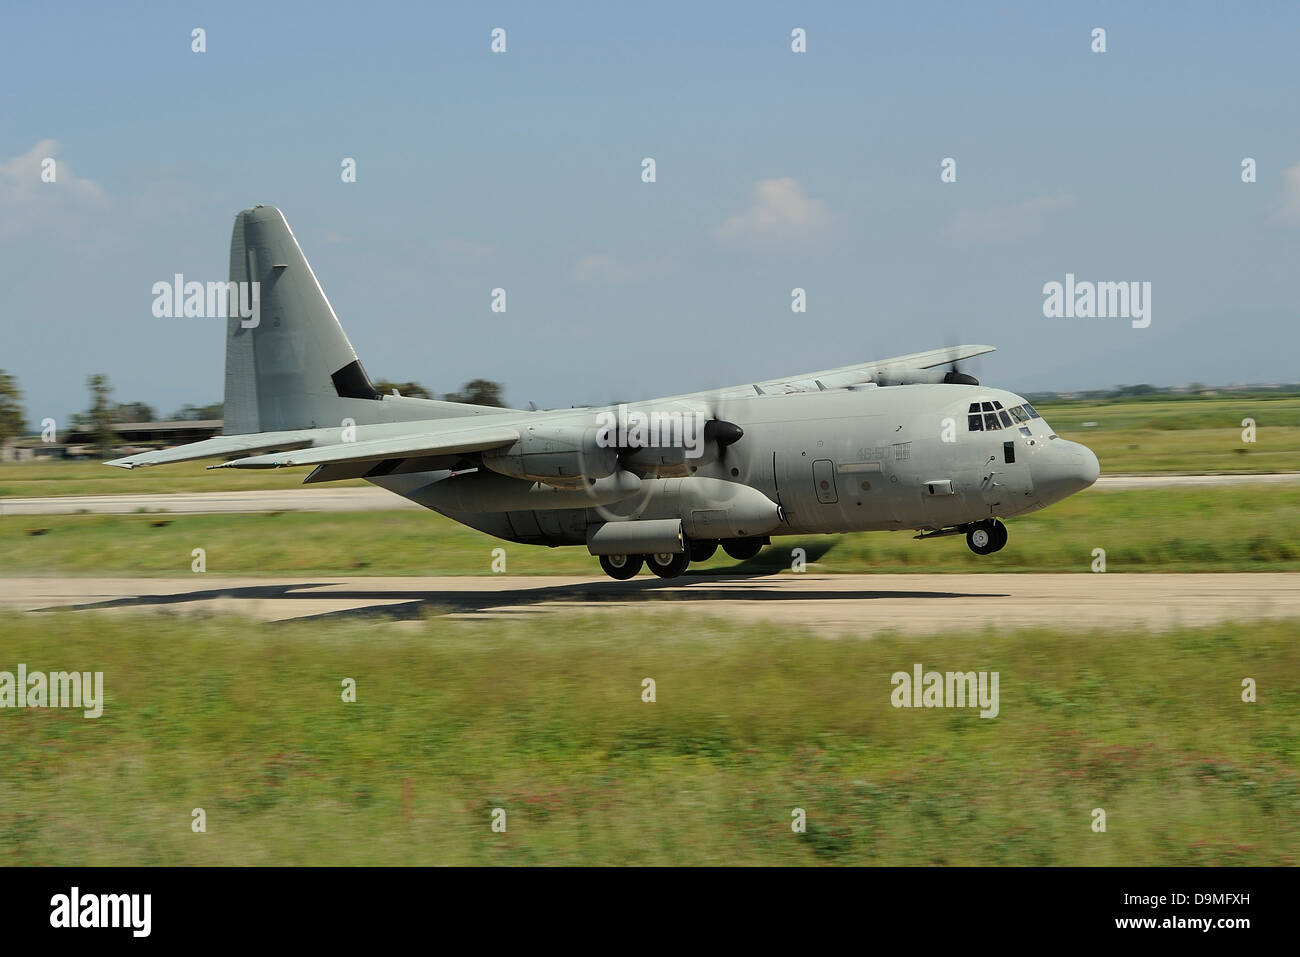 A C-130 Hercules of the Italian Air Force performs a touch and go landing Stock Photo